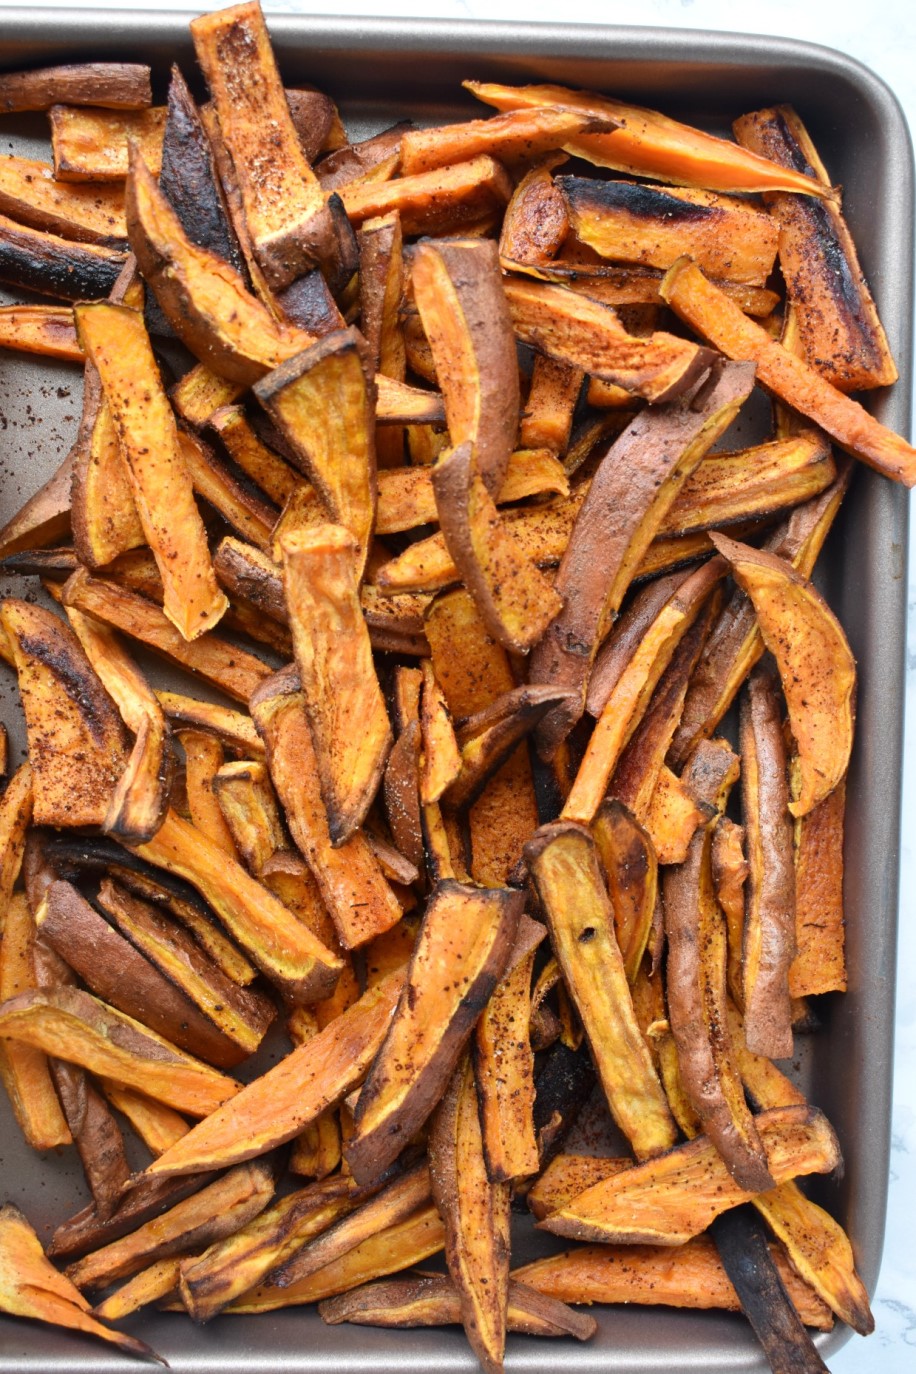 Crispy Baked Sweet Potato Fries are super easy to make, healthy and flavorful with chili, garlic and onion powder! #fries #sweetpotatoes #sweetpotato #frenchfries #healthy #cleaneating